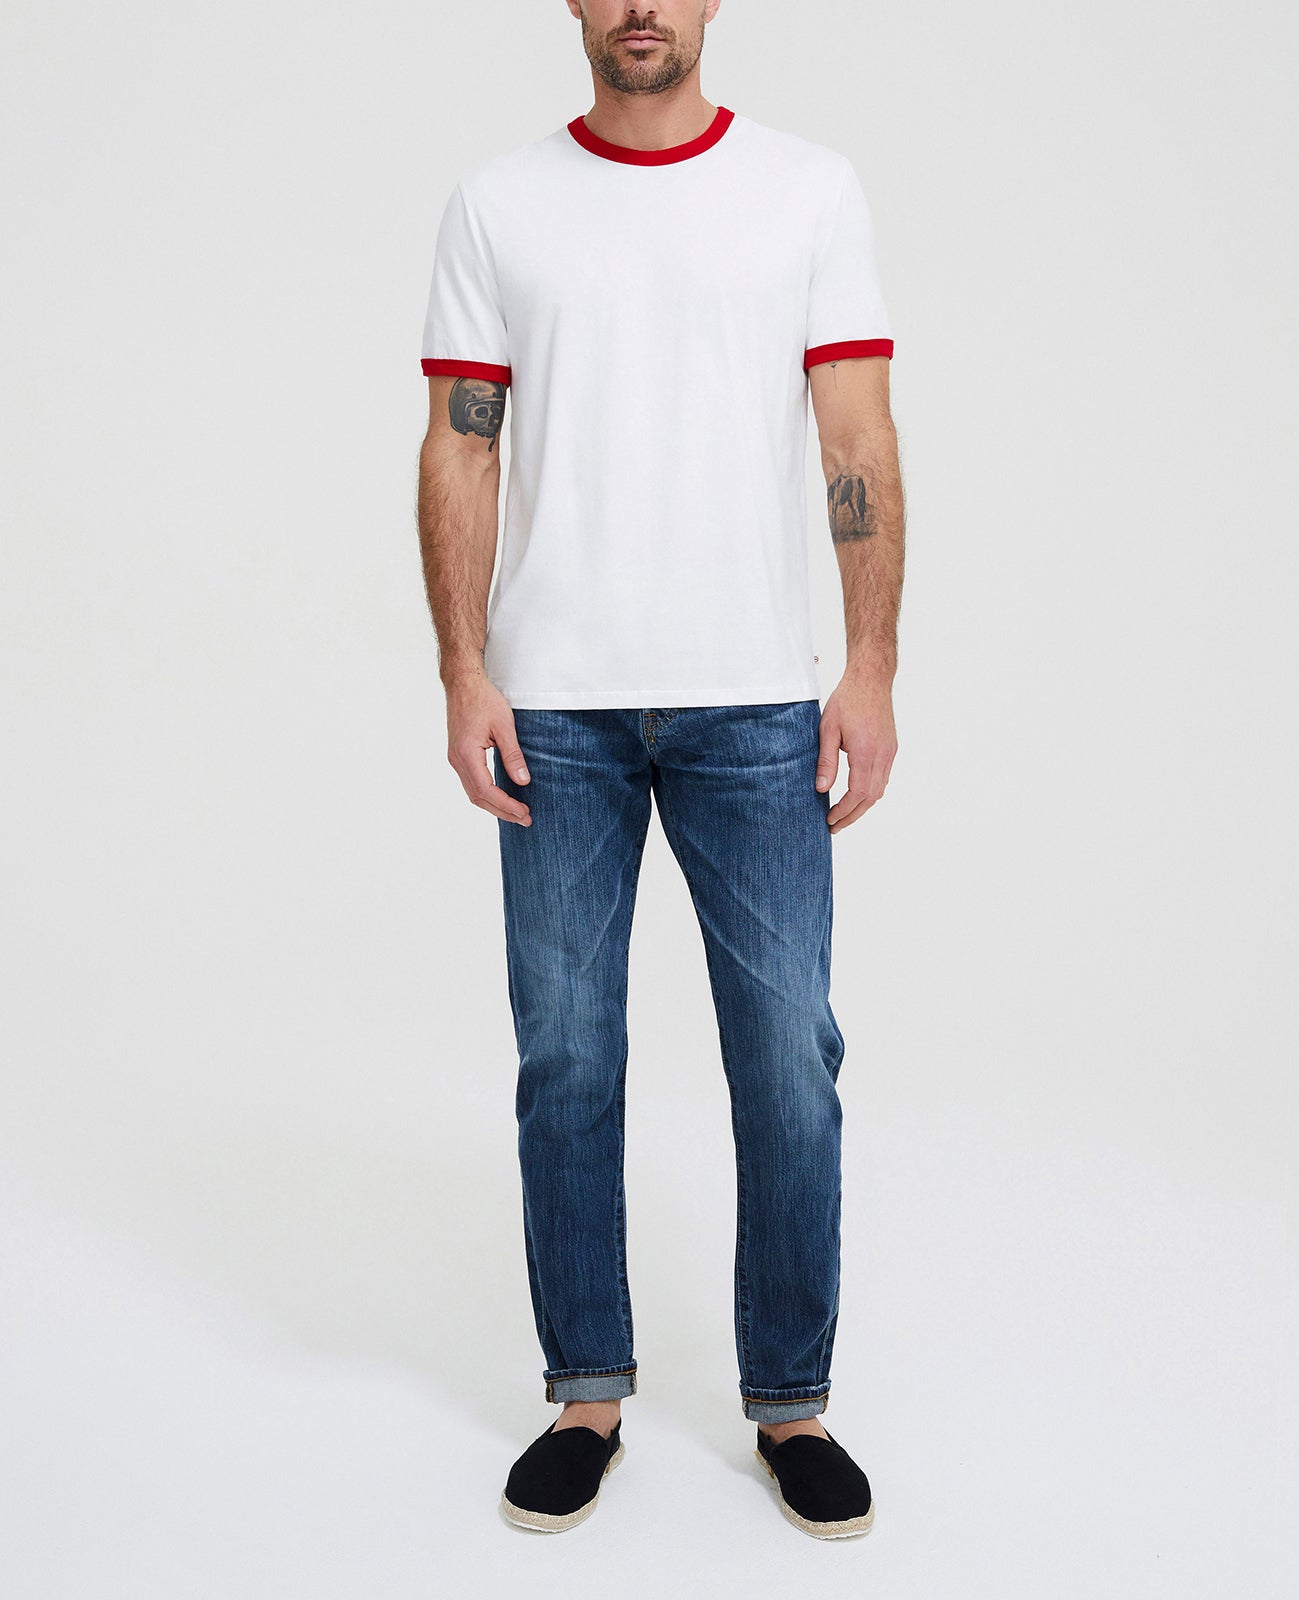 Anders Ringer Tee True White/Clever Red Short Sleeve Tee Men Tops Photo 4